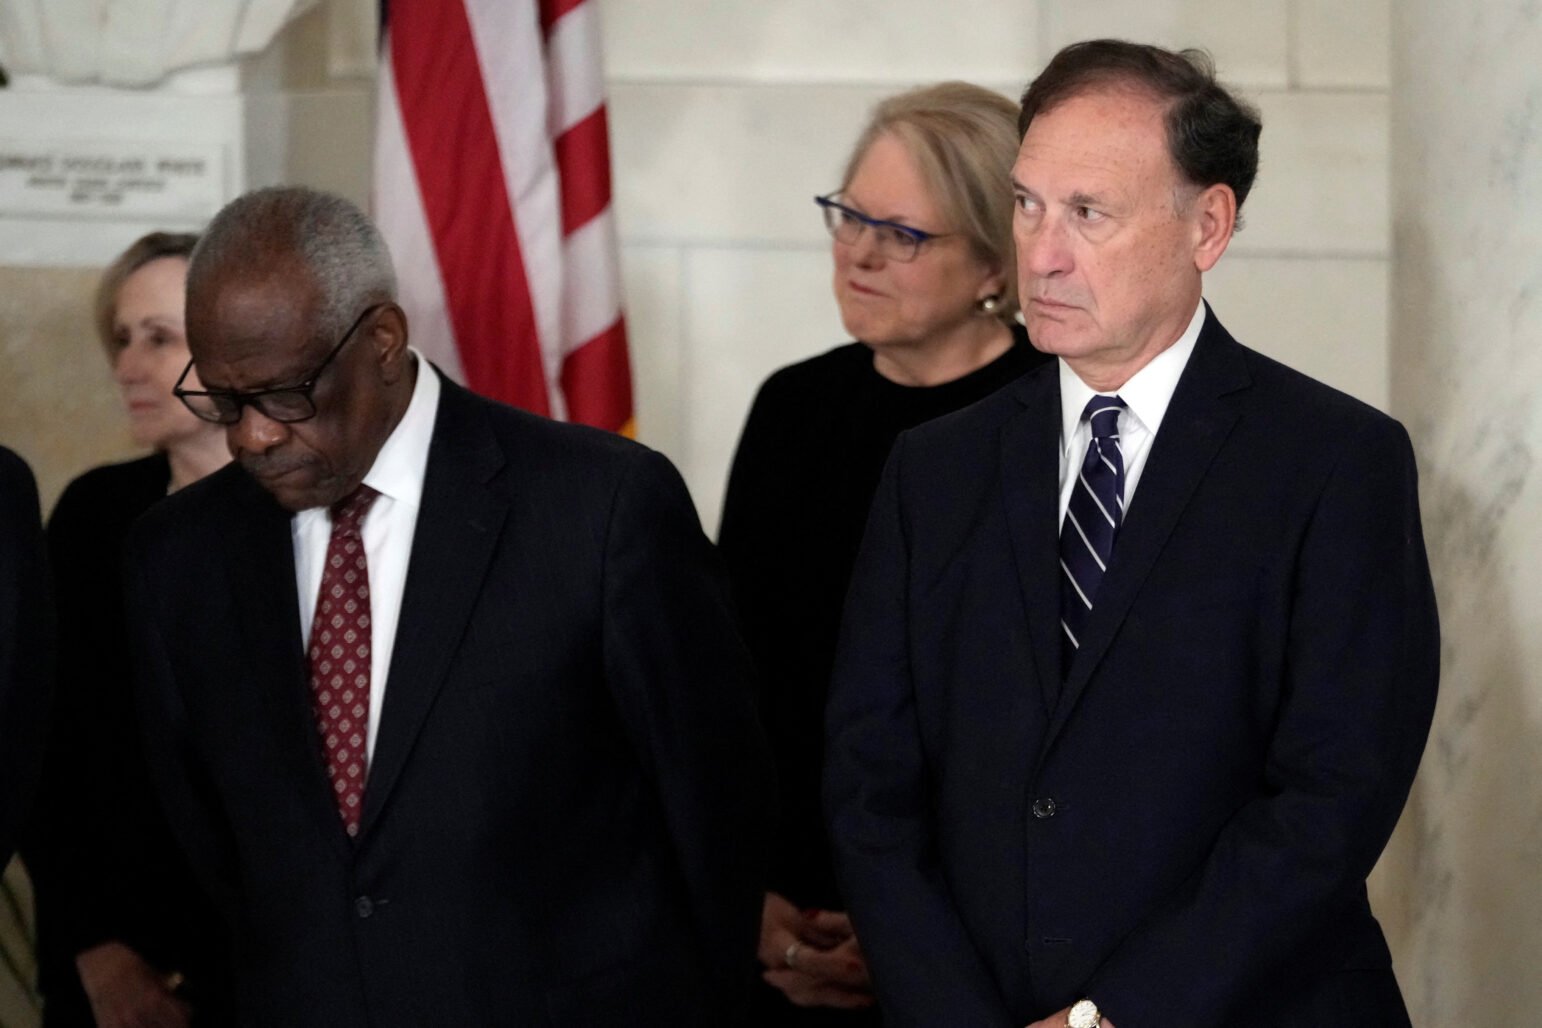 U.S. Supreme Court Justices Clarence Thomas and Samuel Alito standing together in a formal setting. Justice Thomas is looking down, while Justice Alito is looking ahead. Both are dressed in dark suits, and an American flag is visible in the background.